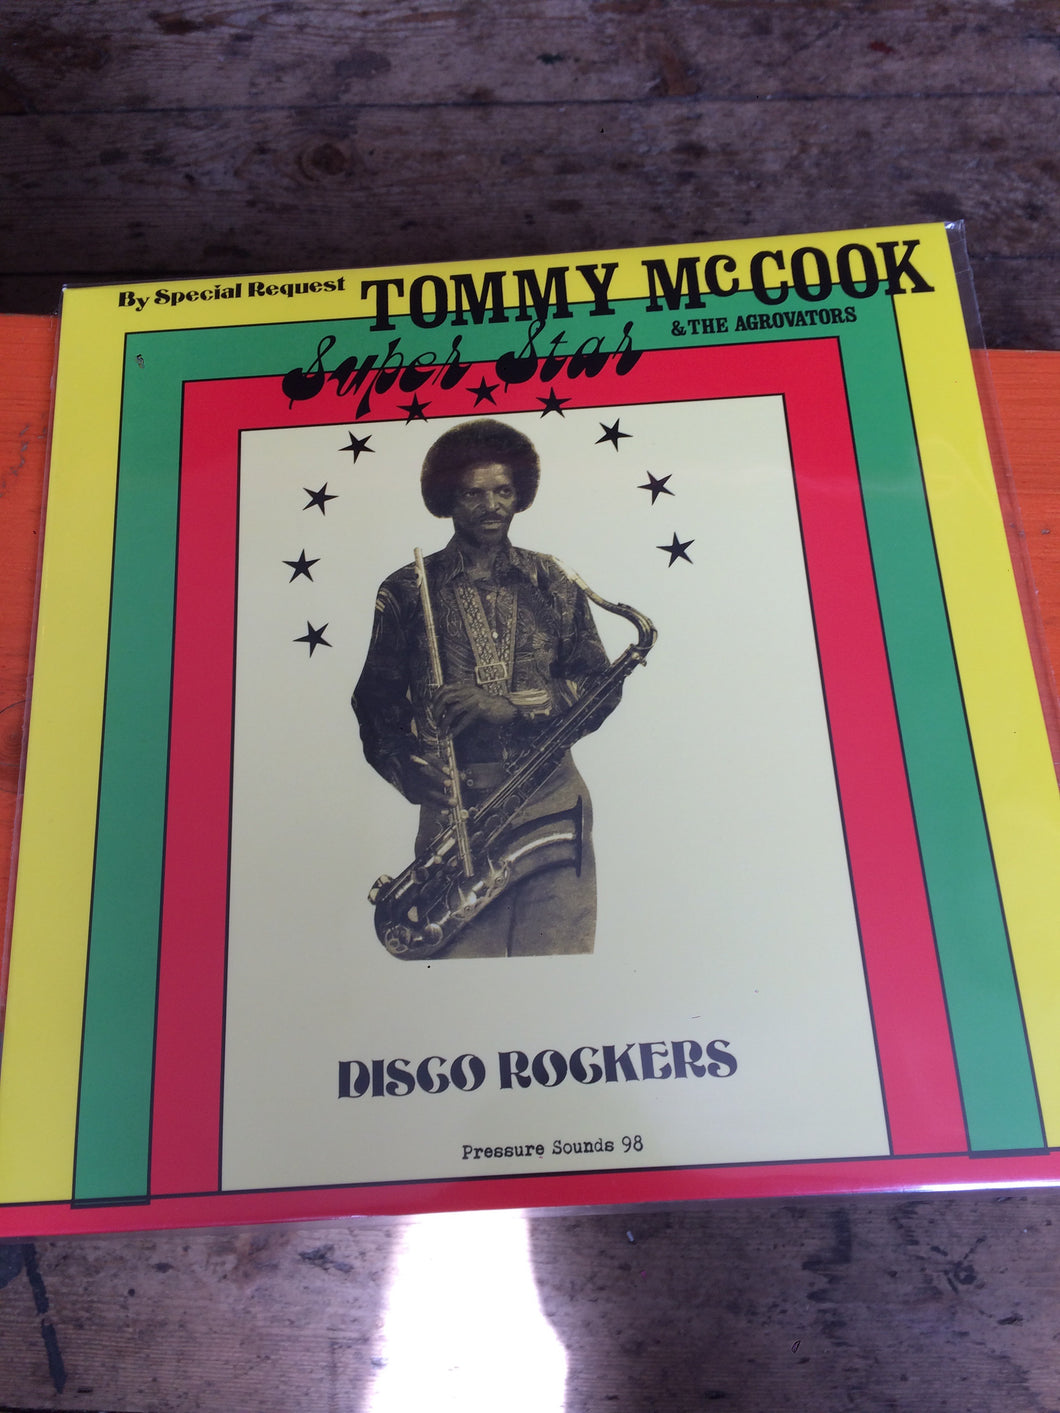 Tommy McCook & The Aggrovators - Super Star Disco Rockers